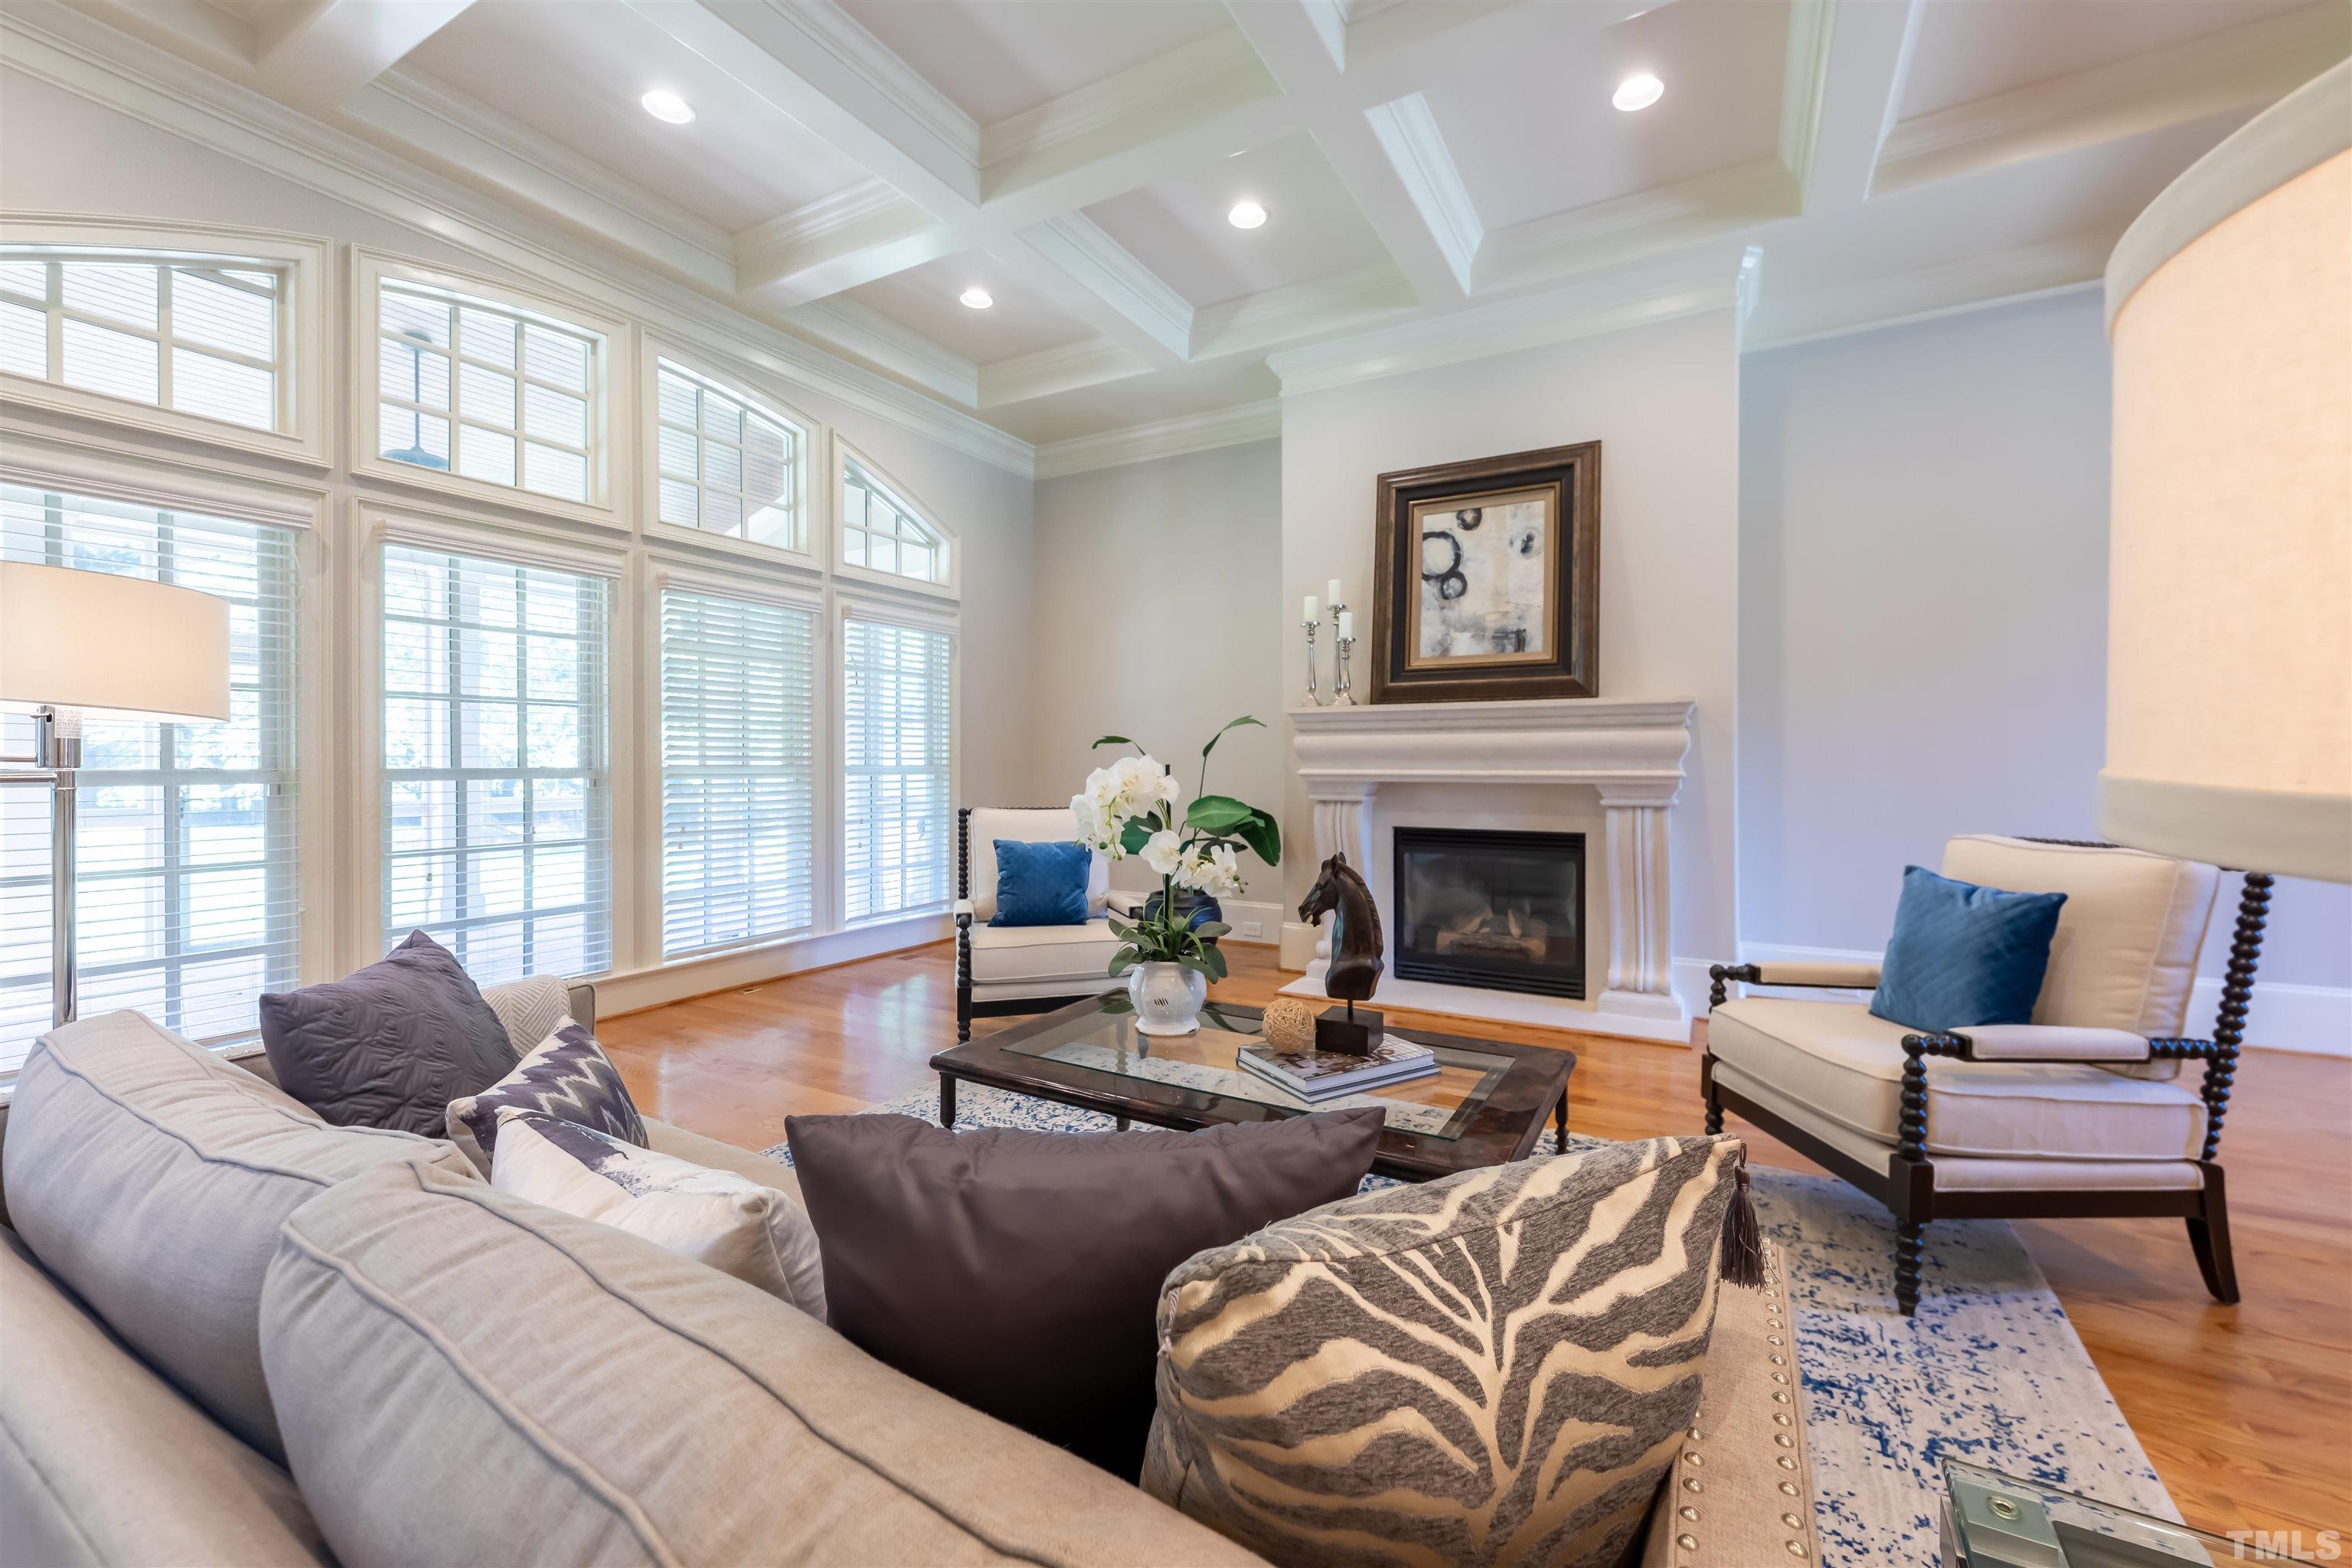 The family room has recessed lighting in the coffered ceiling.  The gas fireplace has an impressive European style surround.